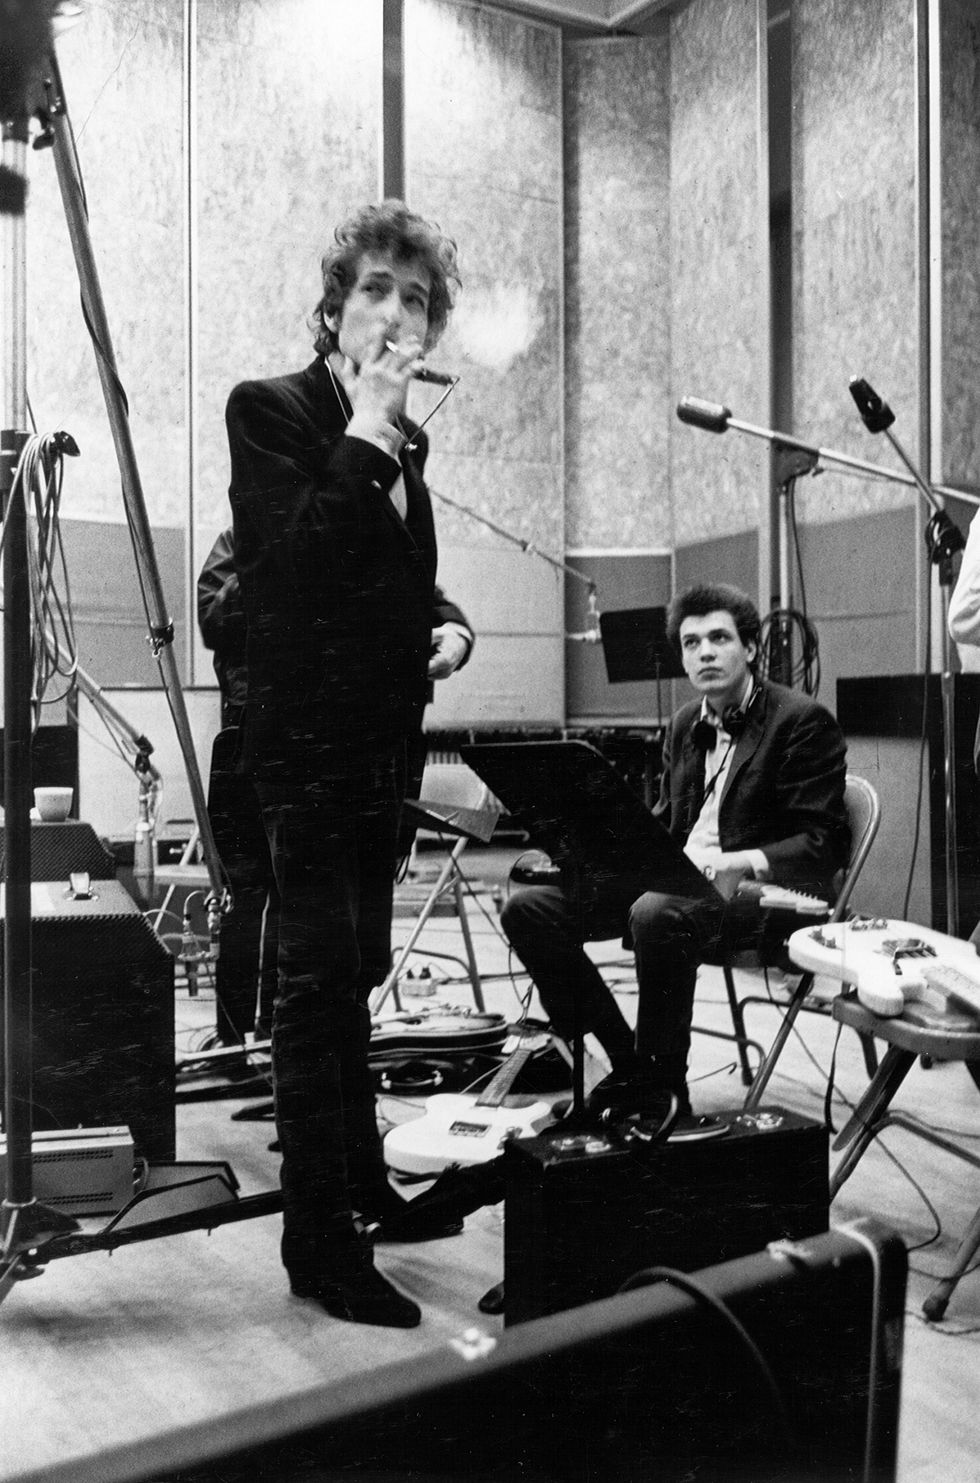 Bob Dylan and guitarist Mike Bloomfield take a break during the recording of the album 'Highway 61 Revisited' in the summer of 1965 in New York City